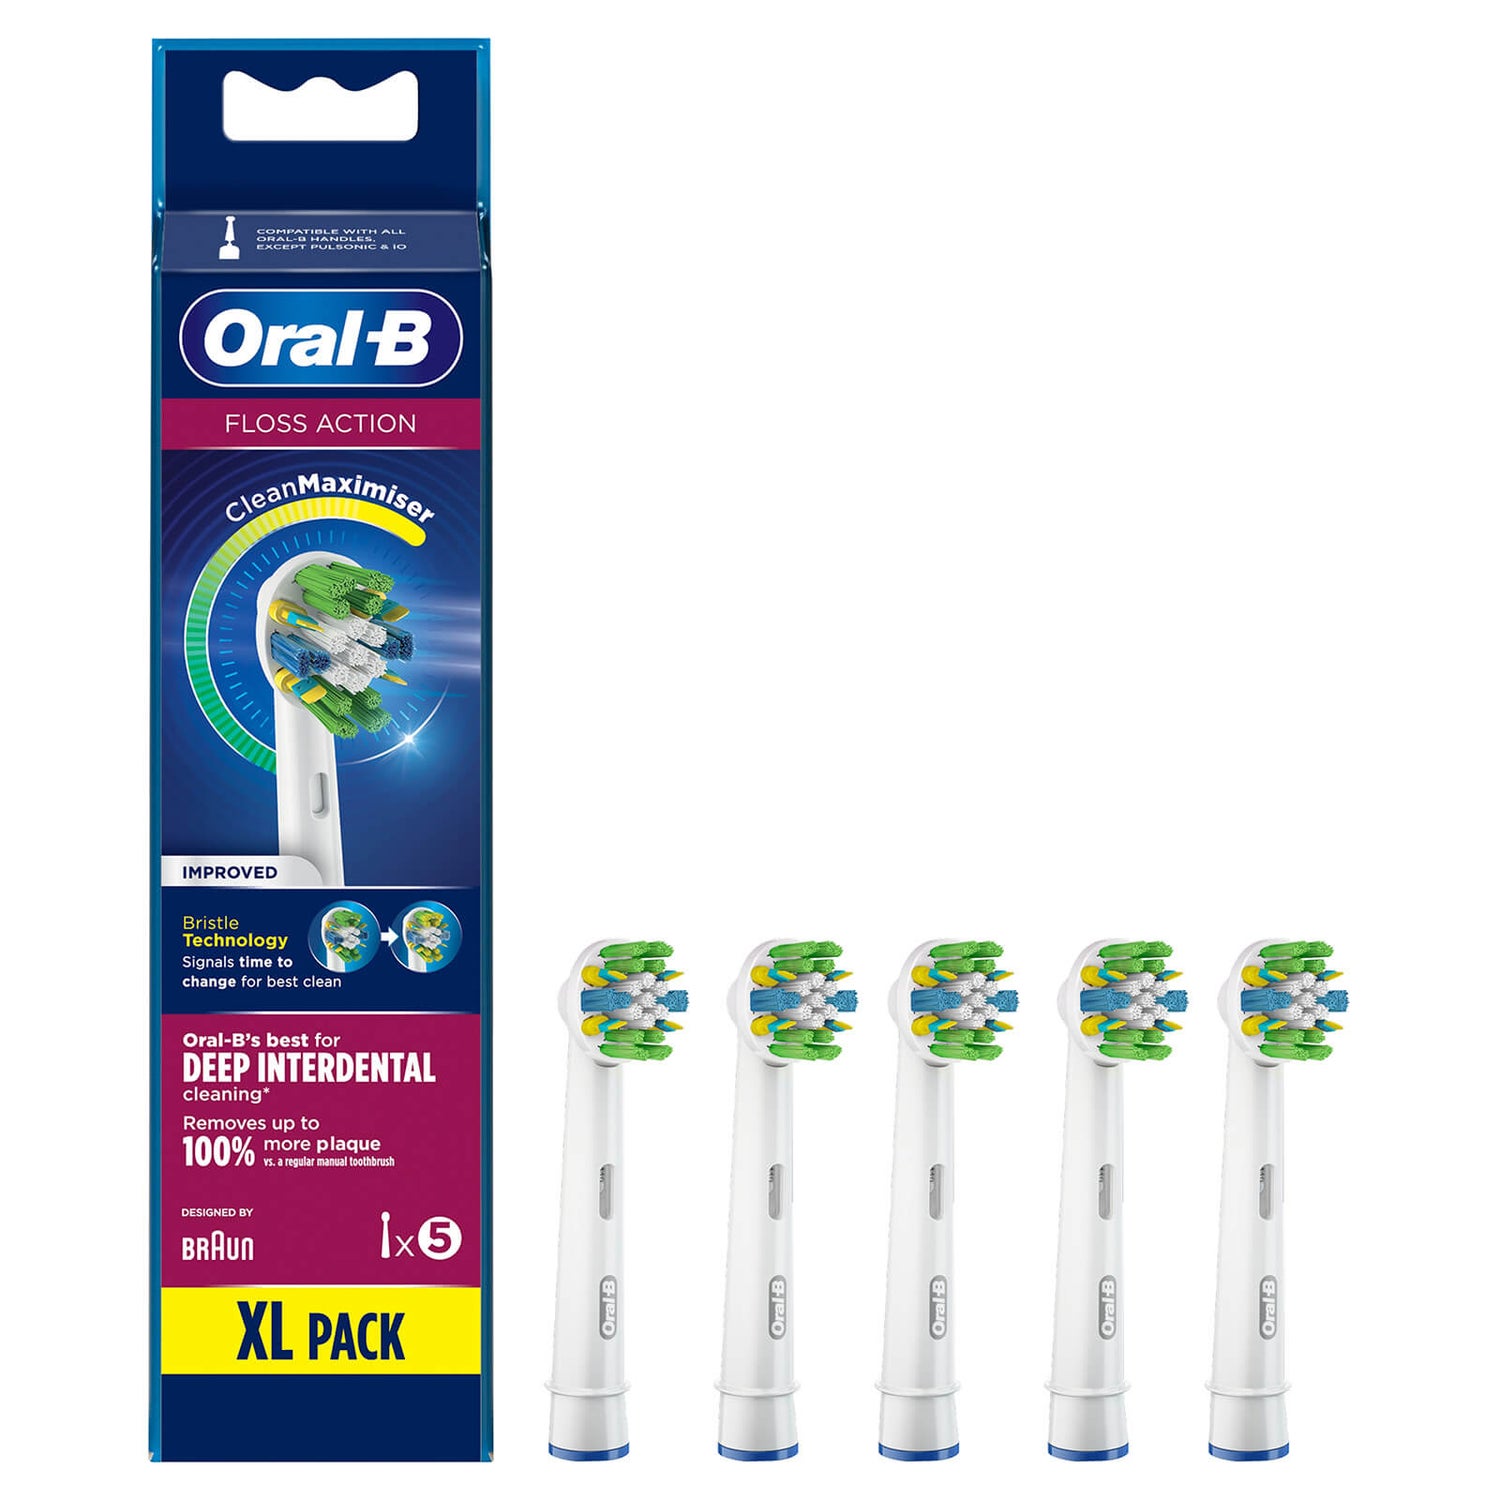 Oral B Flos sAction Brush Head with CleanMaximiser - 5 Counts